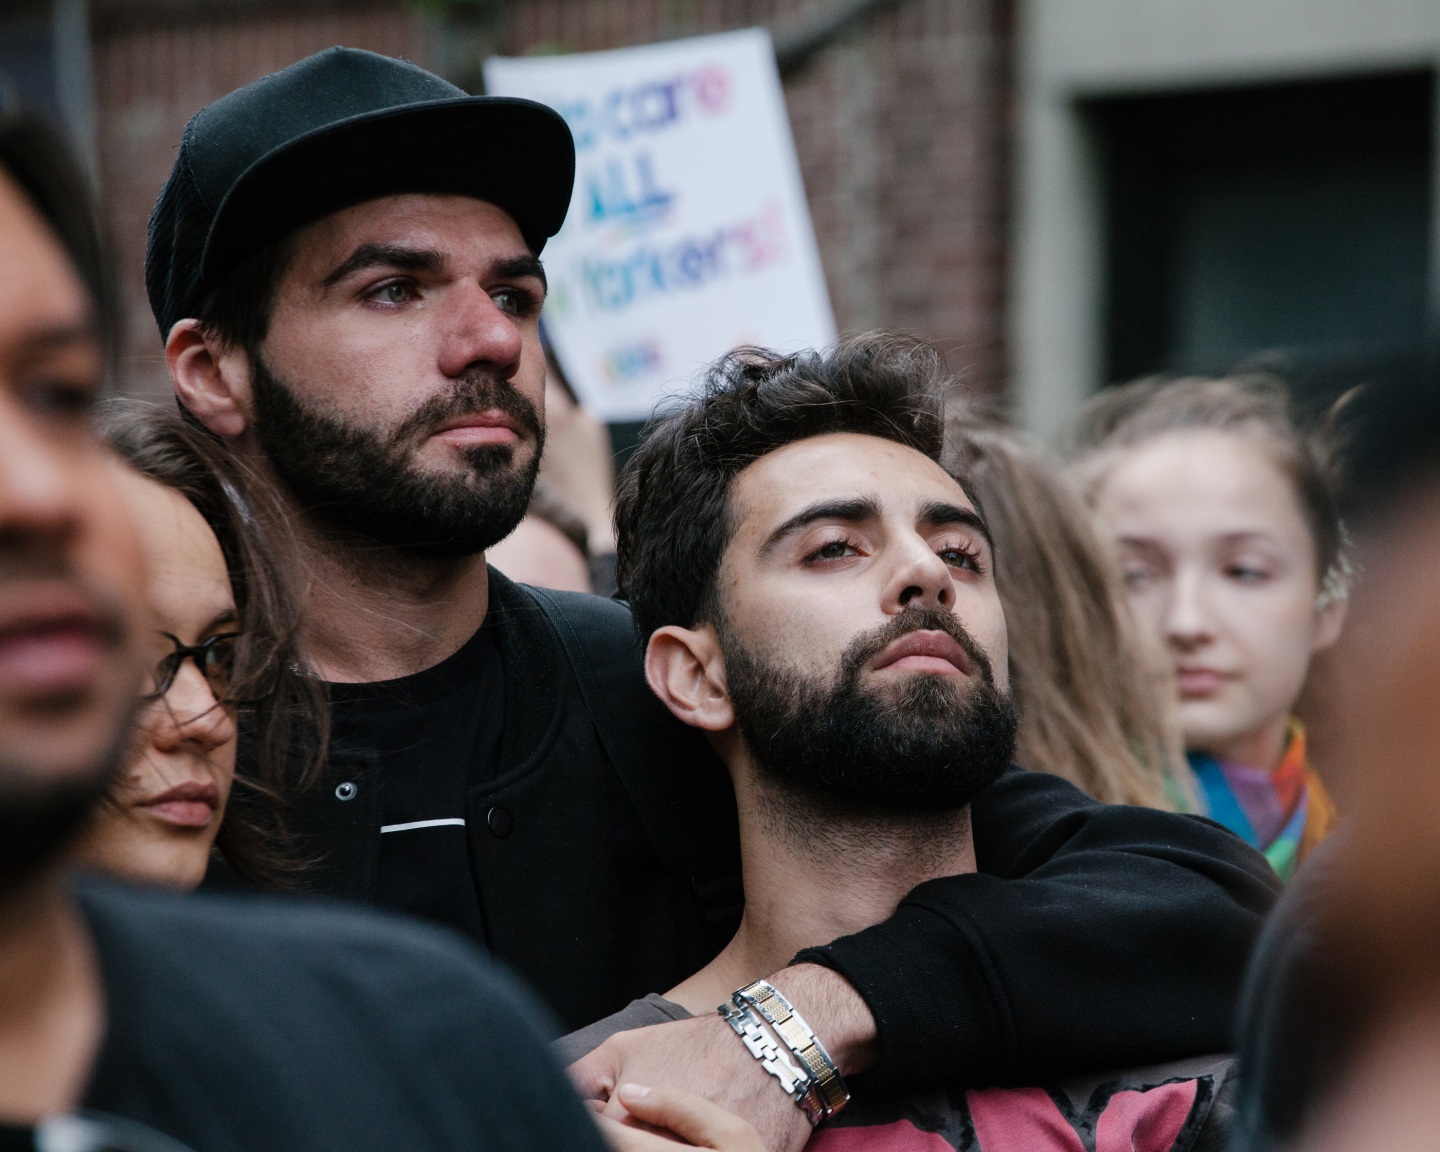 The Faces We Saw At The Stonewall Vigil For Orlando